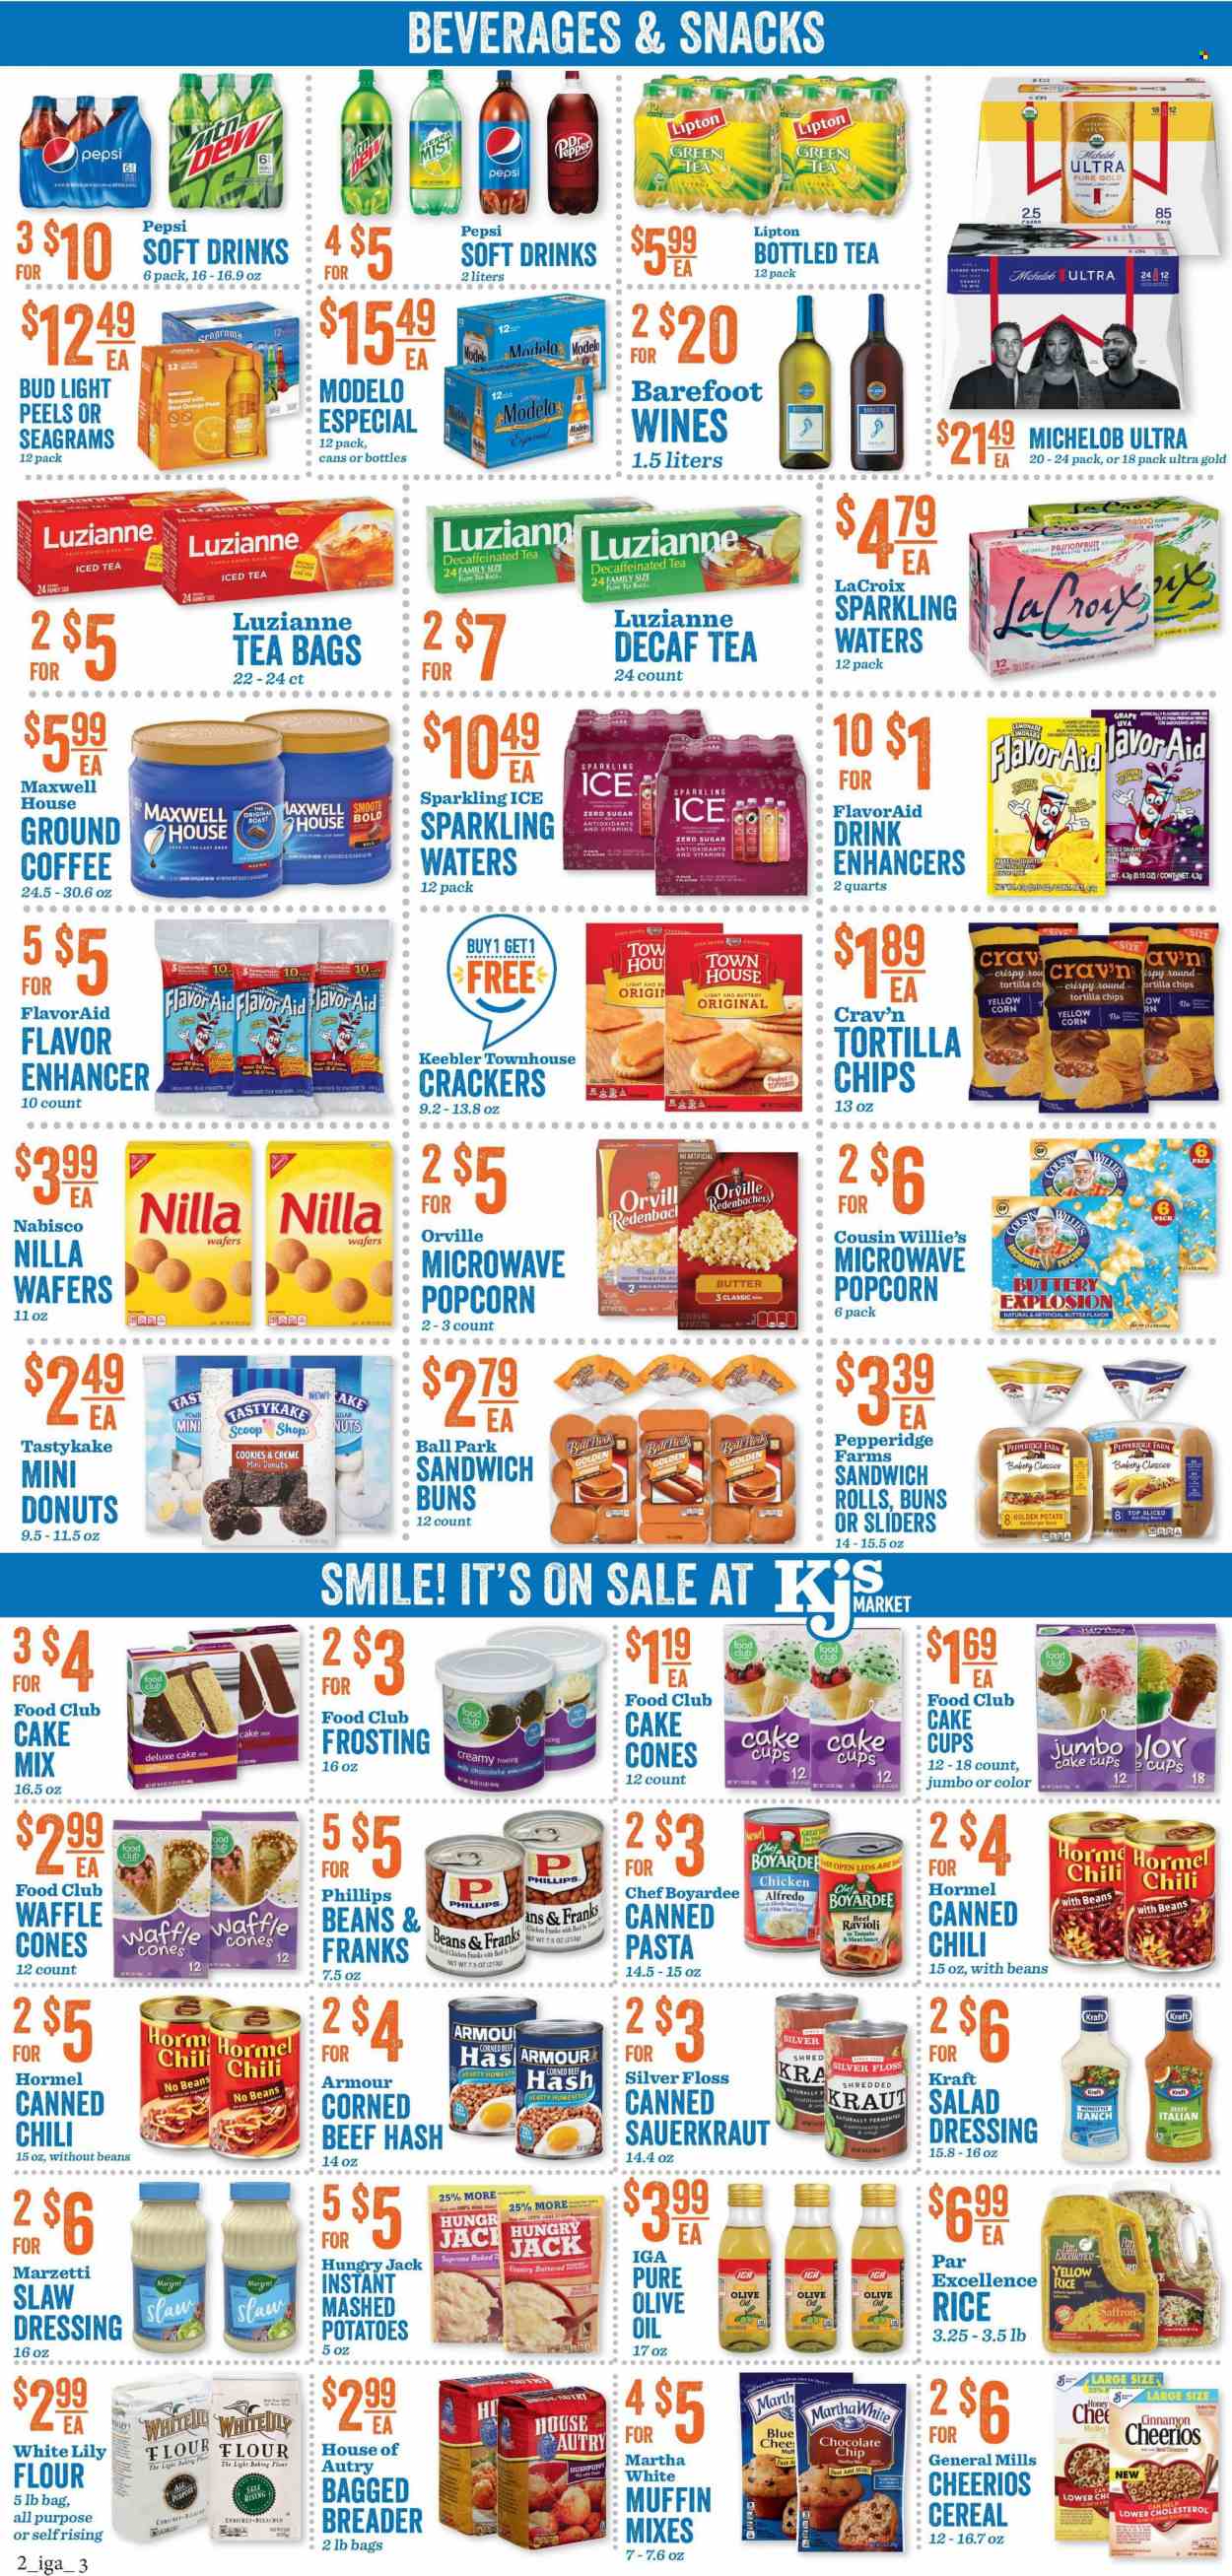 thumbnail - KJ´s Market Flyer - 05/25/2022 - 05/31/2022 - Sales products - buns, burger buns, sandwich rolls, donut, cake mix, muffin mix, oranges, beef hash, mashed potatoes, ravioli, pasta, Alfredo sauce, Kraft®, Hormel, chicken frankfurters, corned beef, butter, cookies, milk chocolate, wafers, snack, crackers, Keebler, tortilla chips, chips, popcorn, frosting, topping, sauerkraut, Chef Boyardee, cereals, Cheerios, cinnamon, salad dressing, dressing, olive oil, oil, honey, lemonade, Pepsi, Lipton, soft drink, sparkling water, green tea, Maxwell House, tea bags, coffee, ground coffee, L'Or, beer, Bud Light, Lager, Modelo, beef meat, cup, Michelob. Page 2.